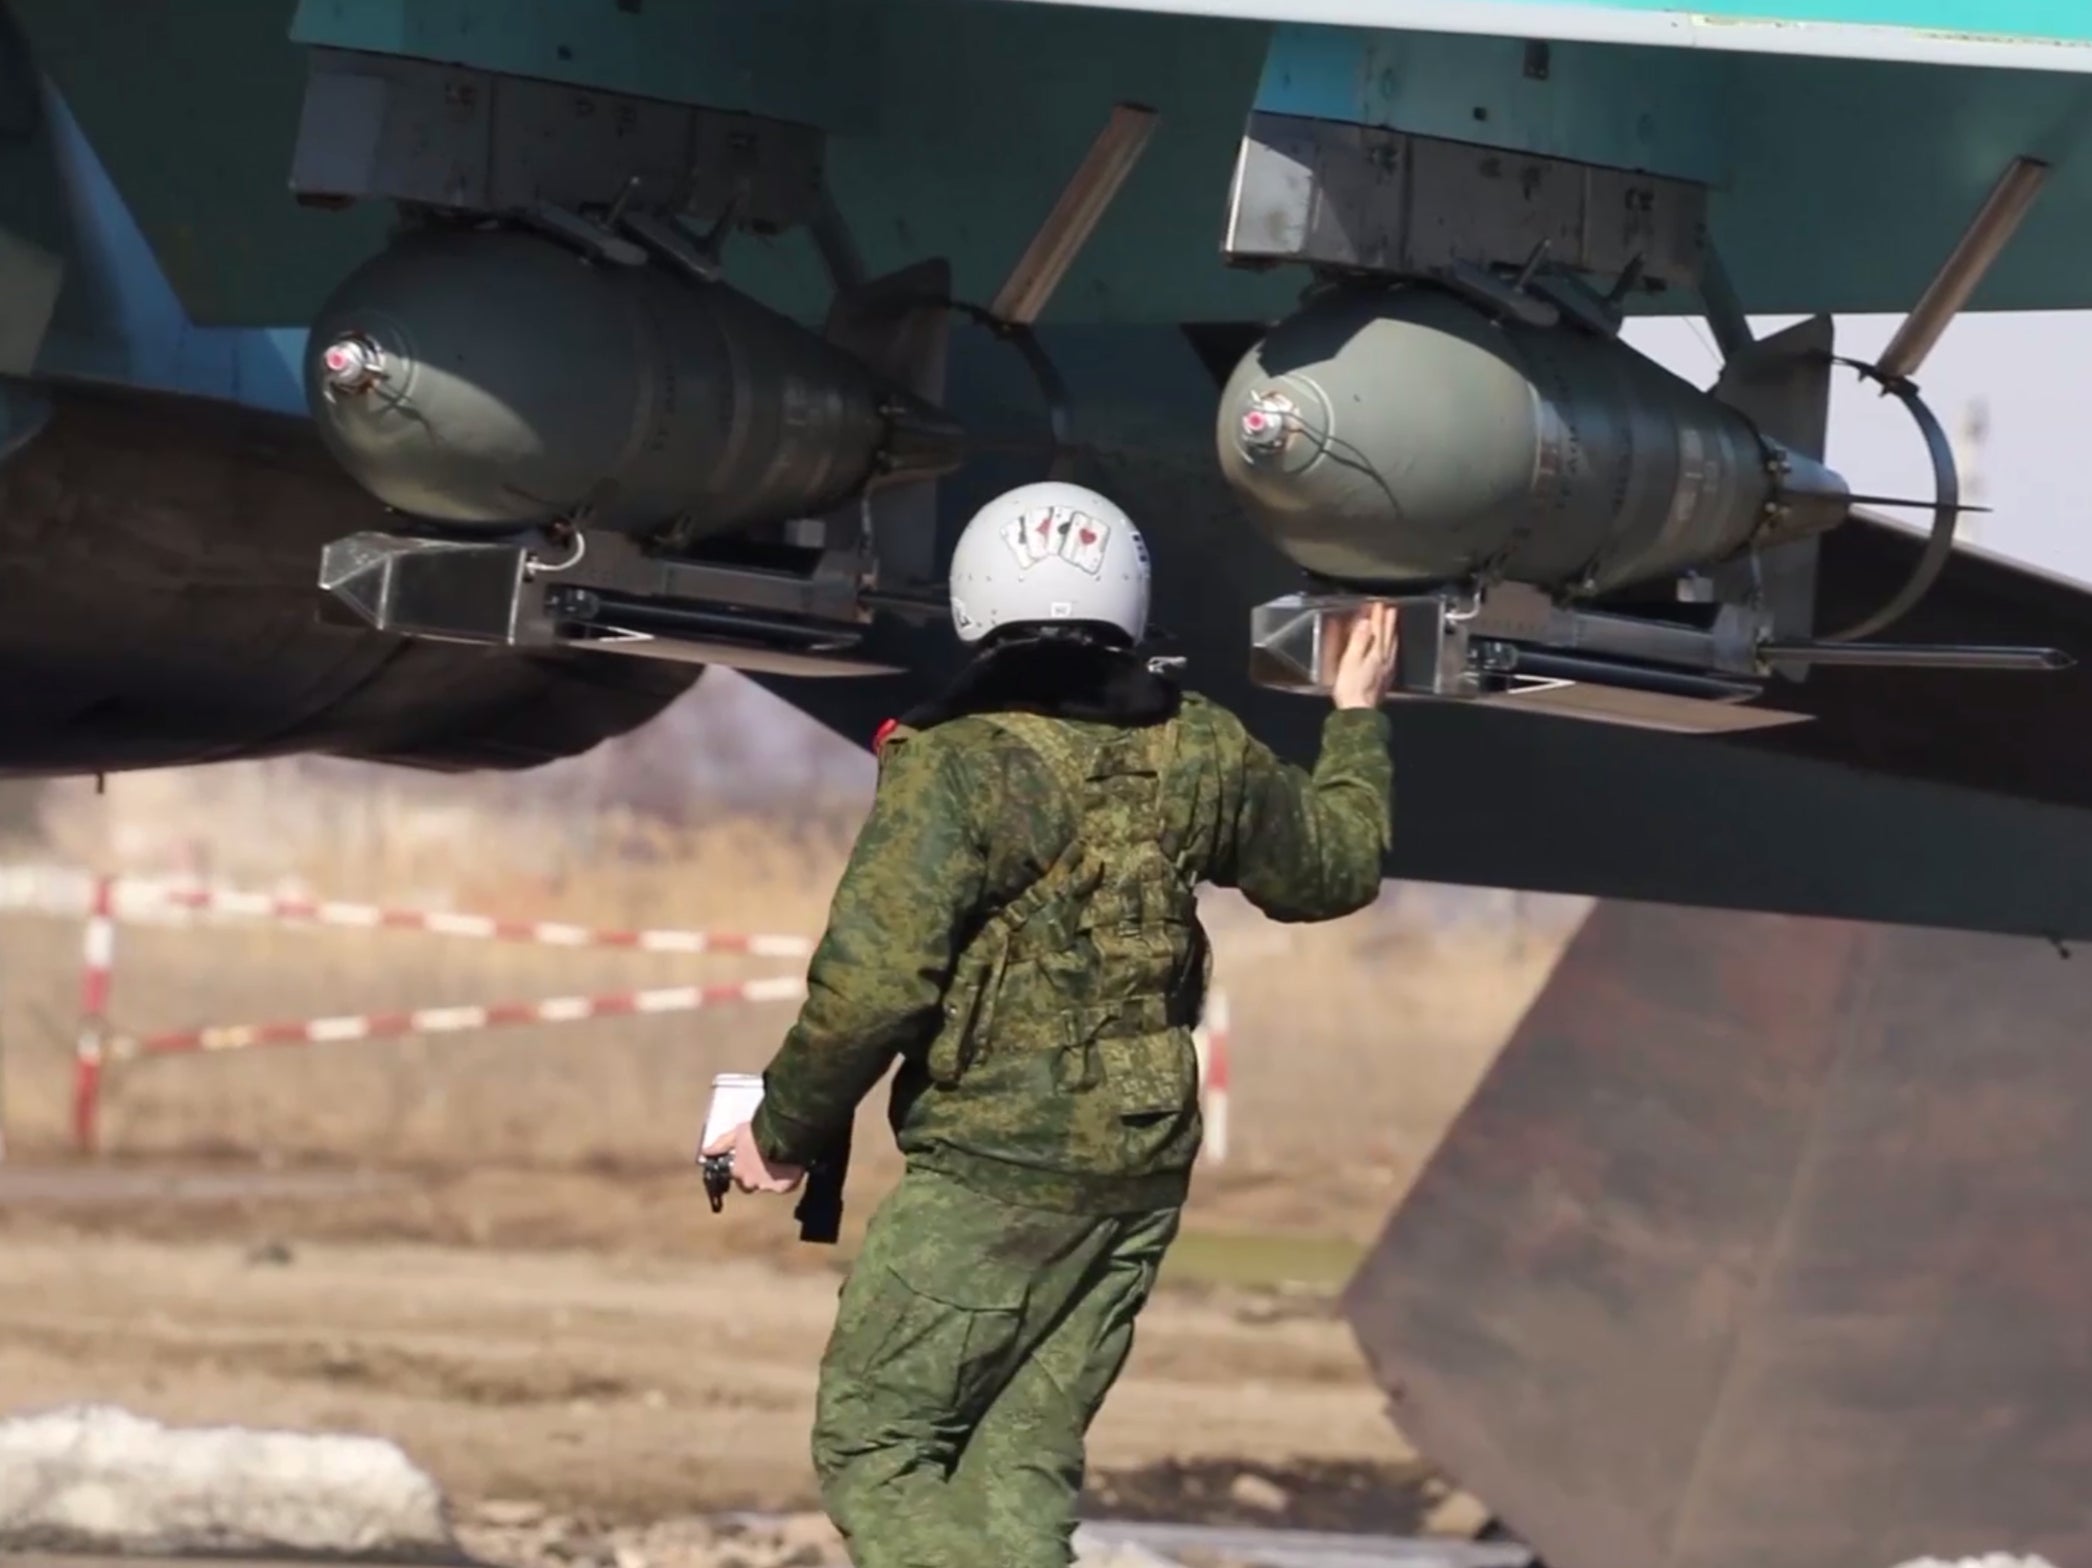 A Russian pilot inspects FAB bombs mounted by a Russian Su-34 fighter jet